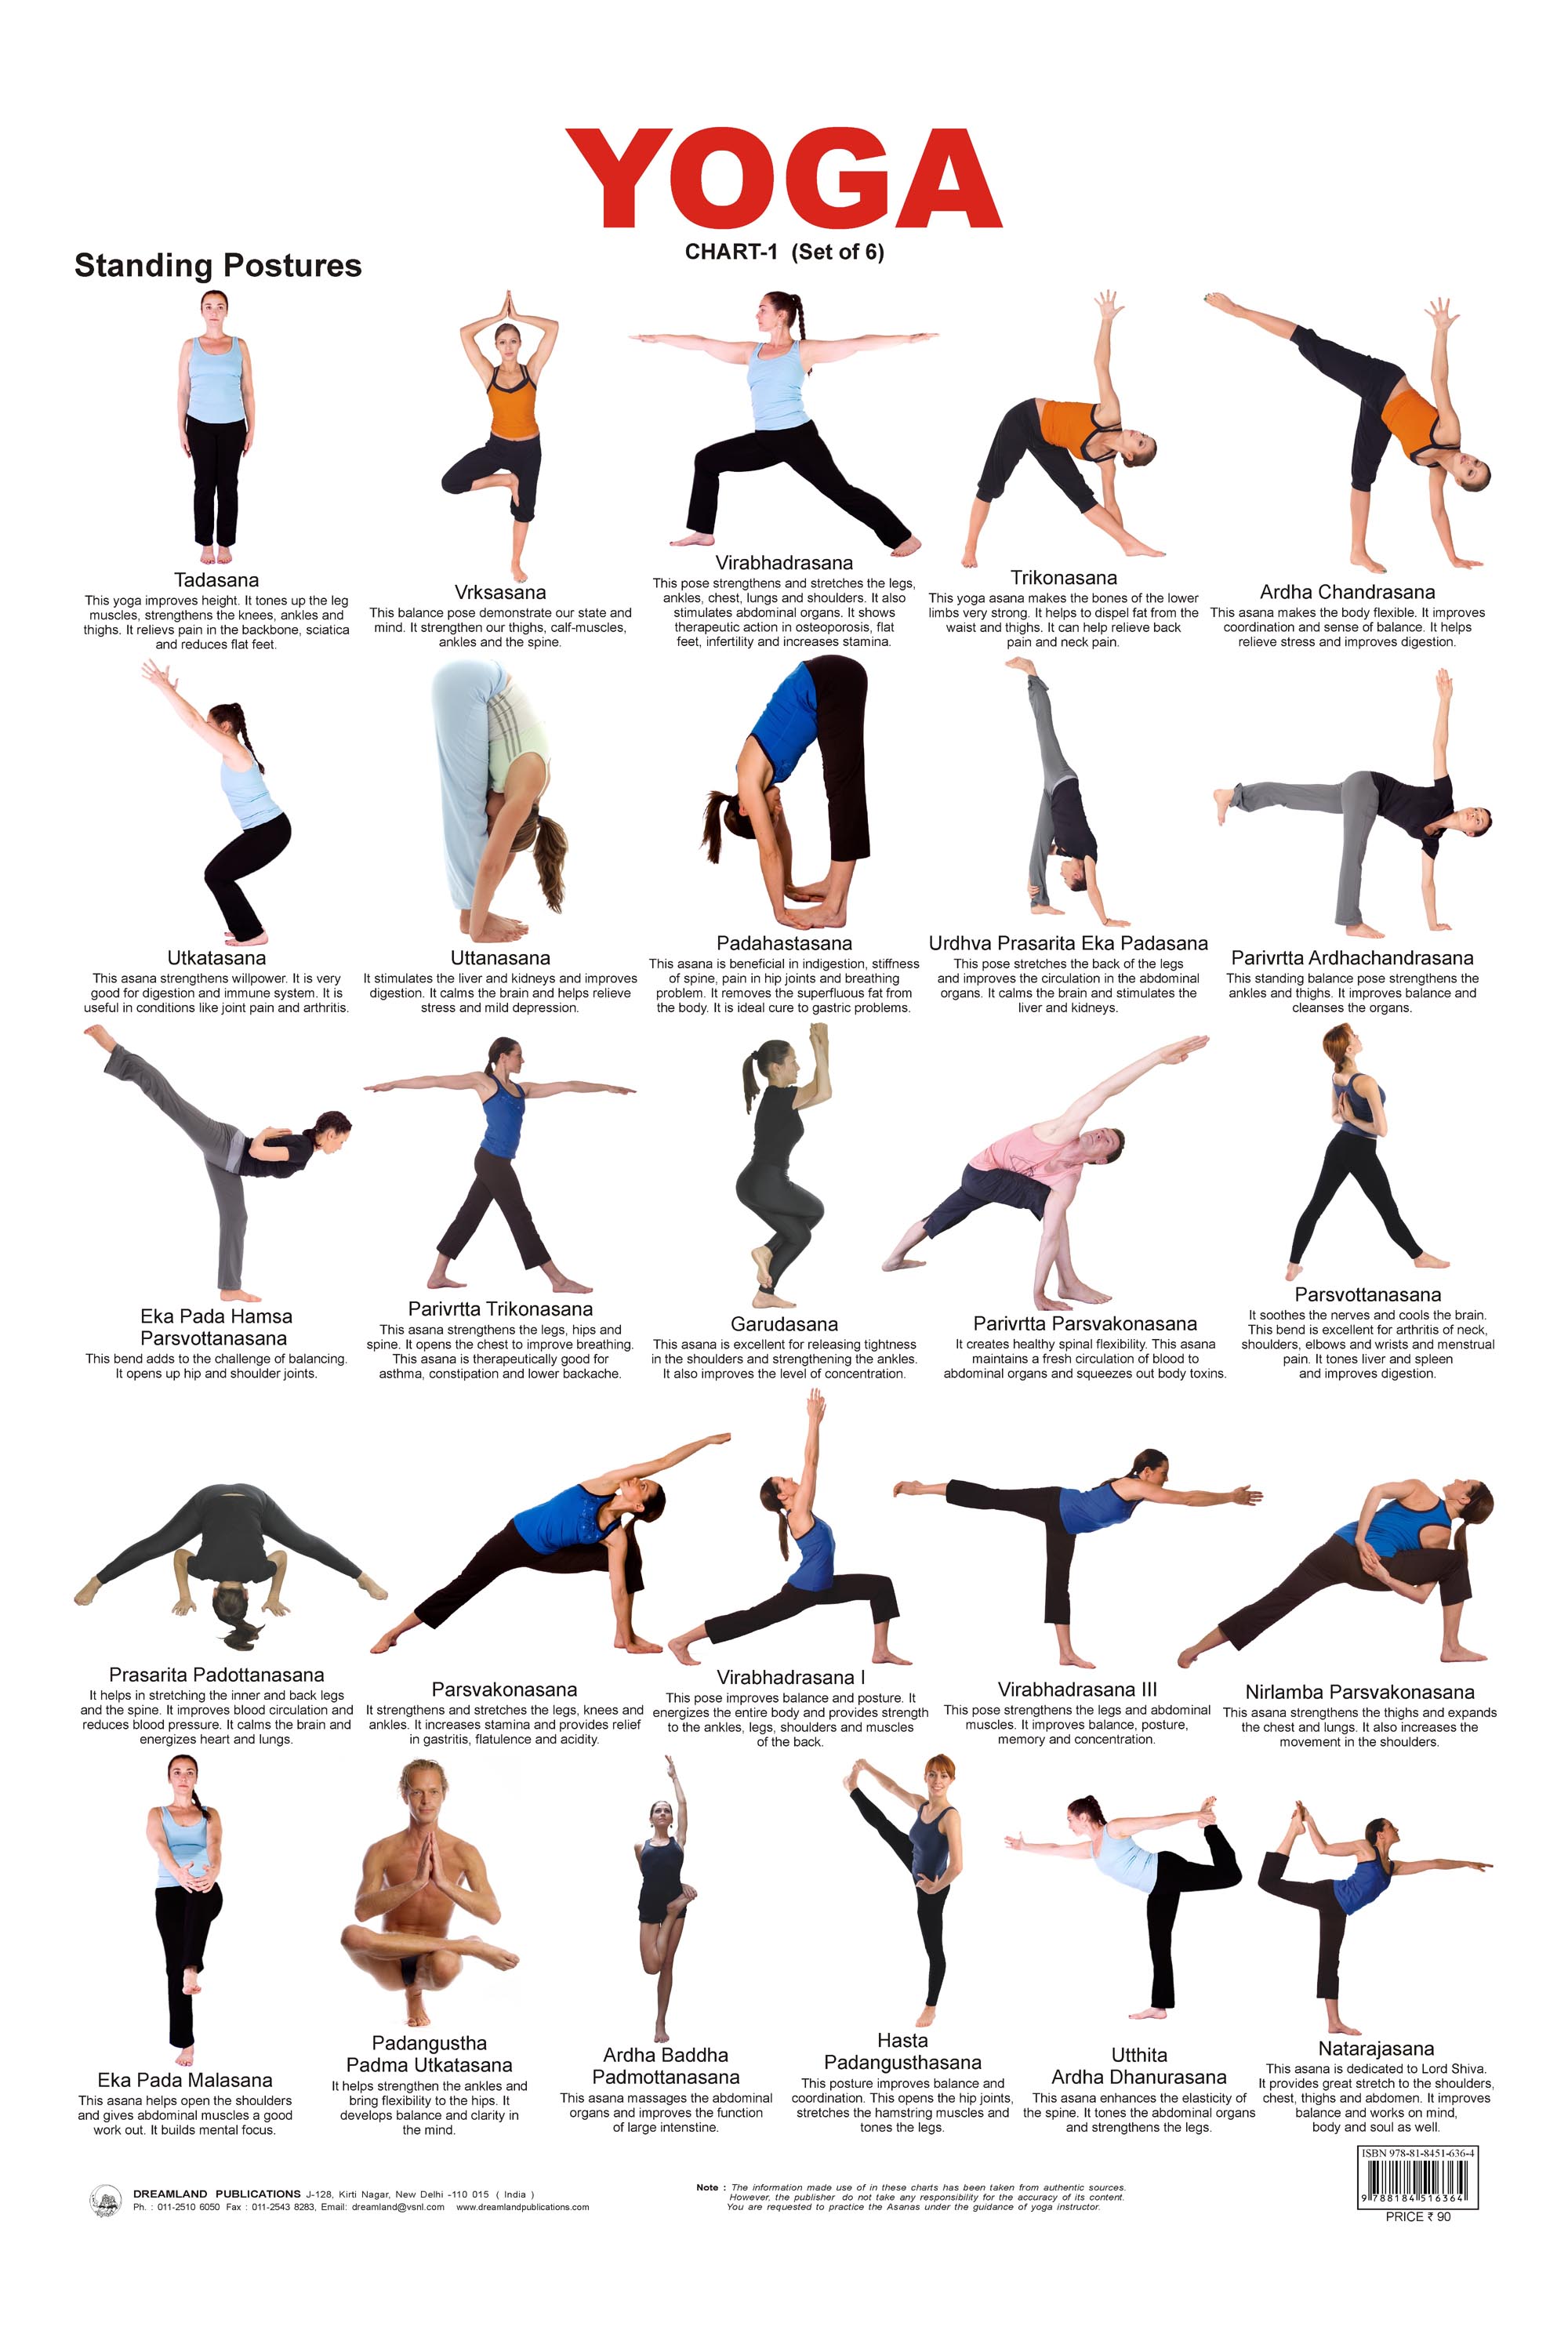 over by Yoga. hundred  different  poses many a are  Yoga There poses yoga schools of name